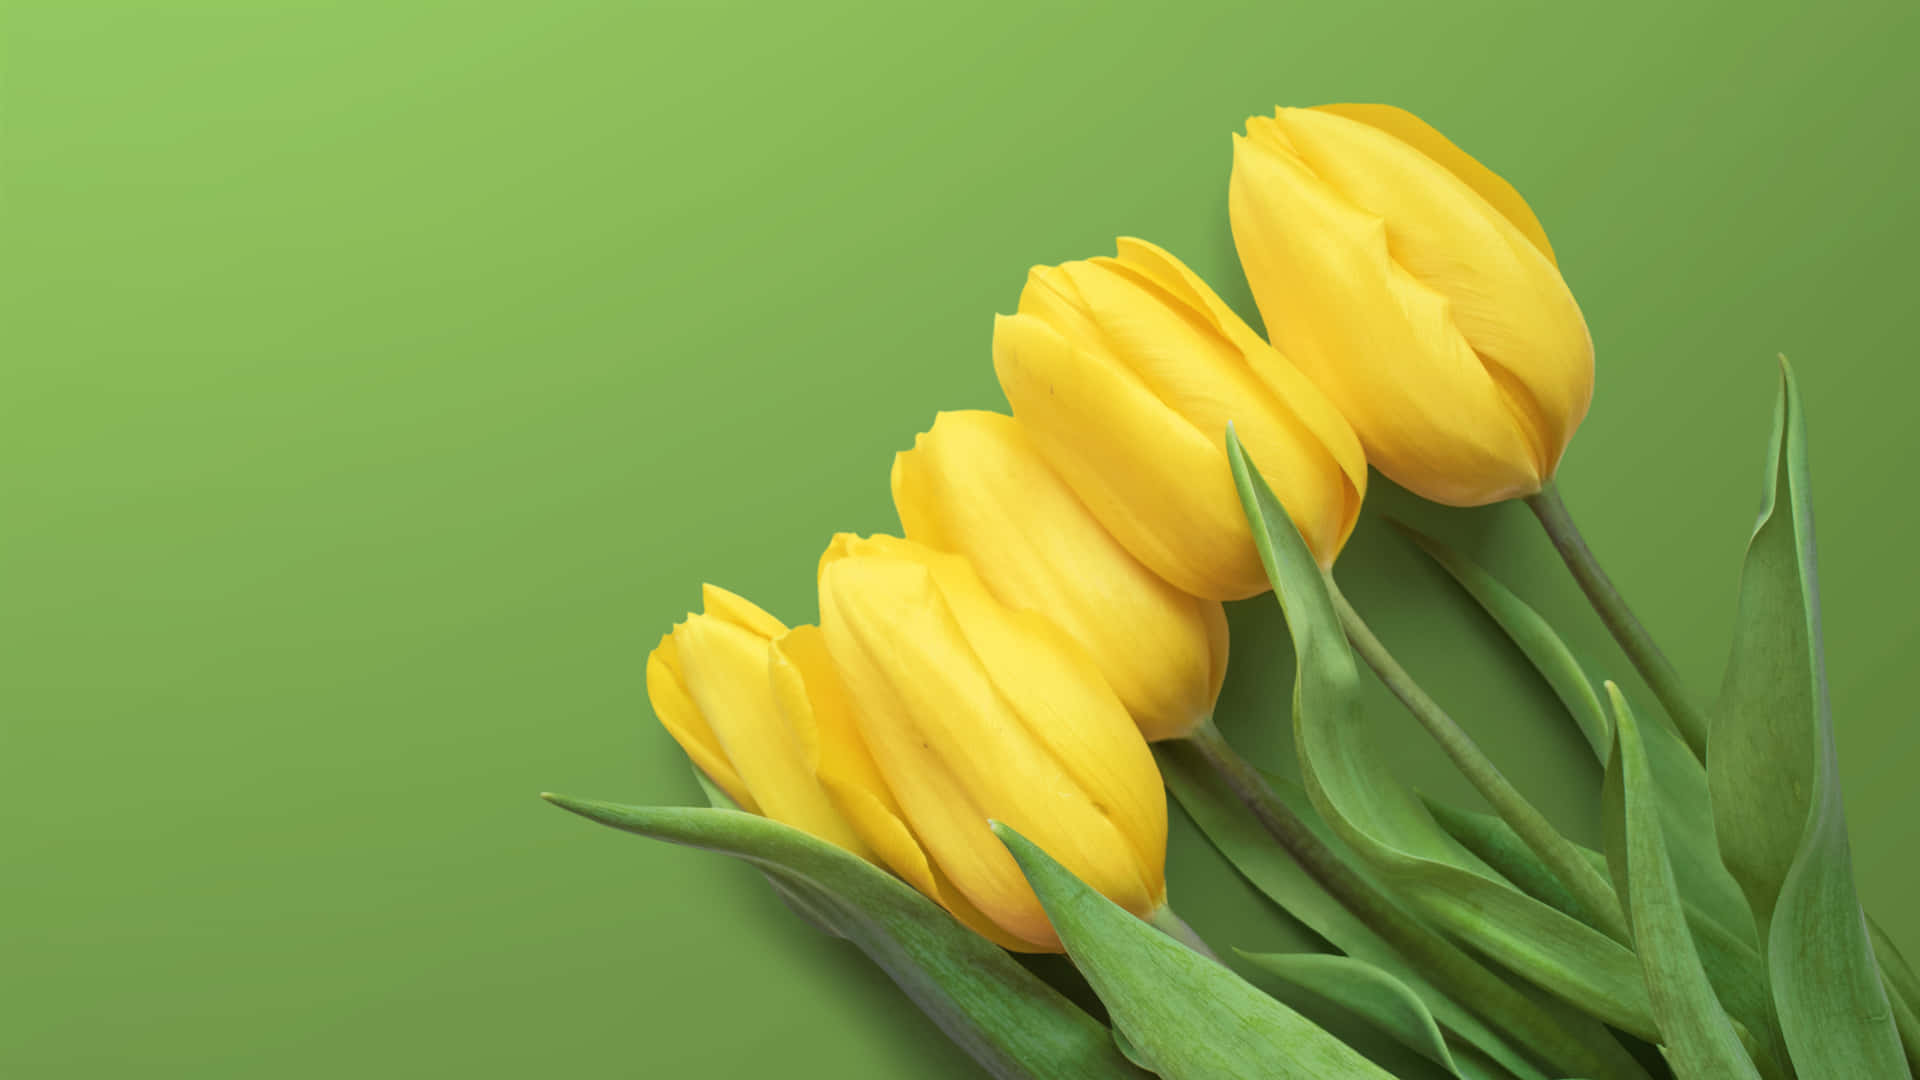 Captivating Yellow Tulips in Full Bloom Wallpaper